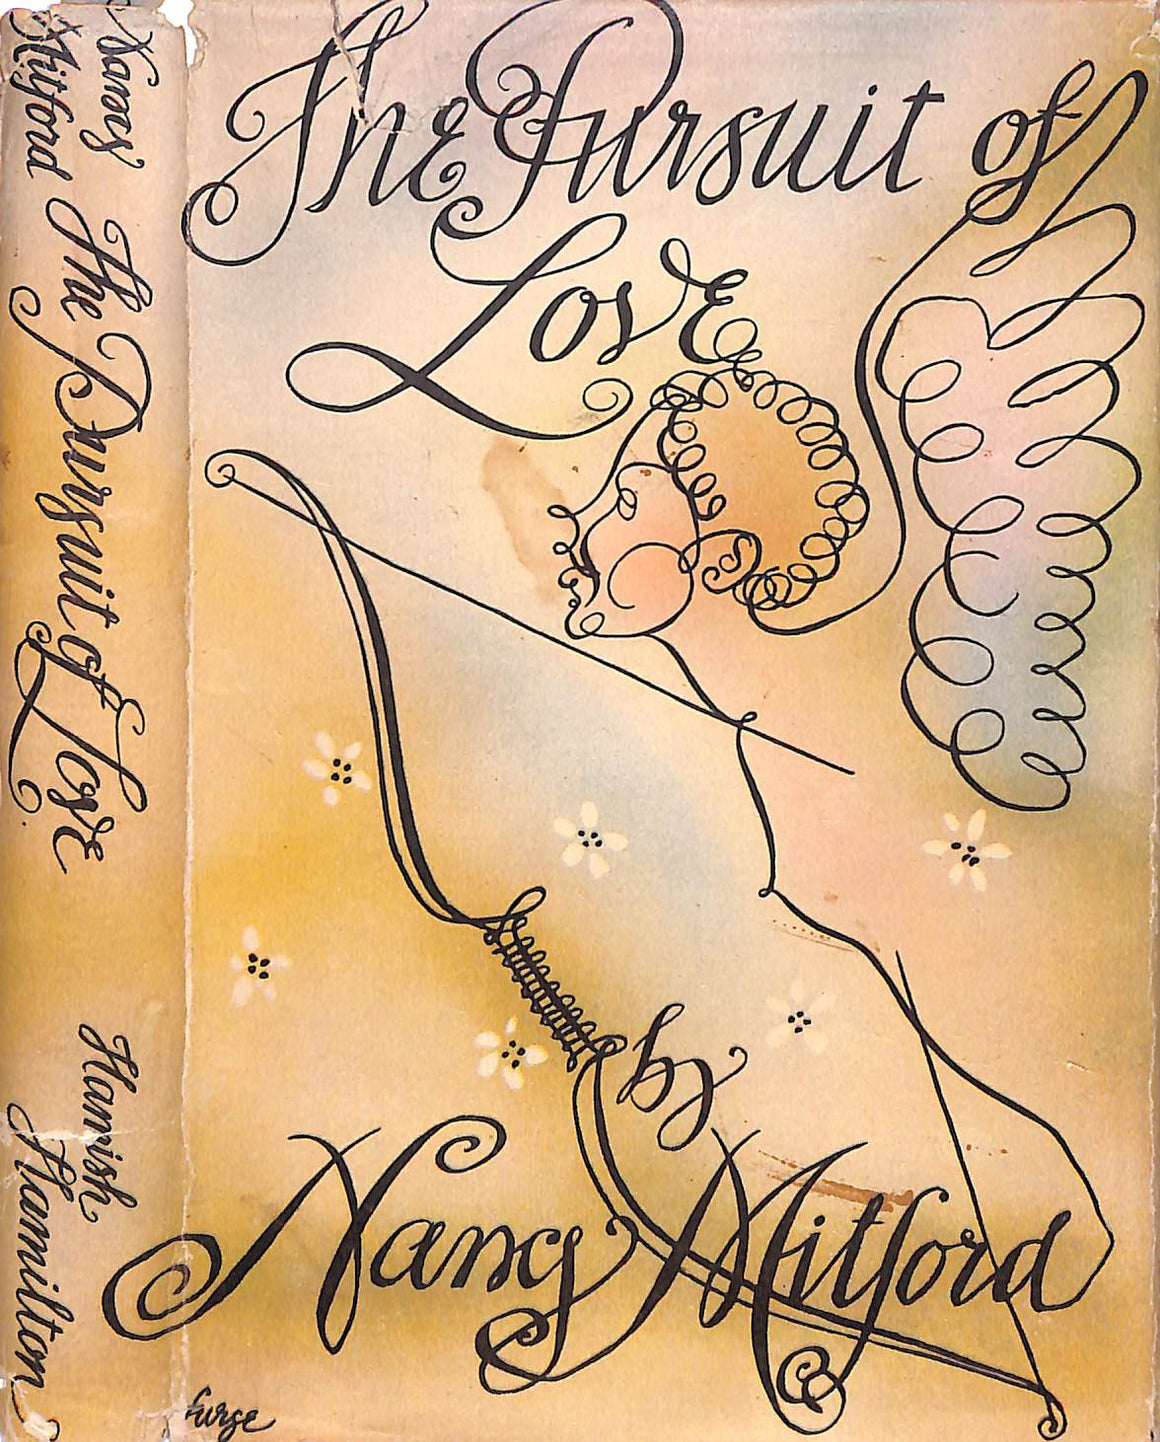 "The Pursuit Of Love" 1946 MITFORD, Nancy (SOLD)